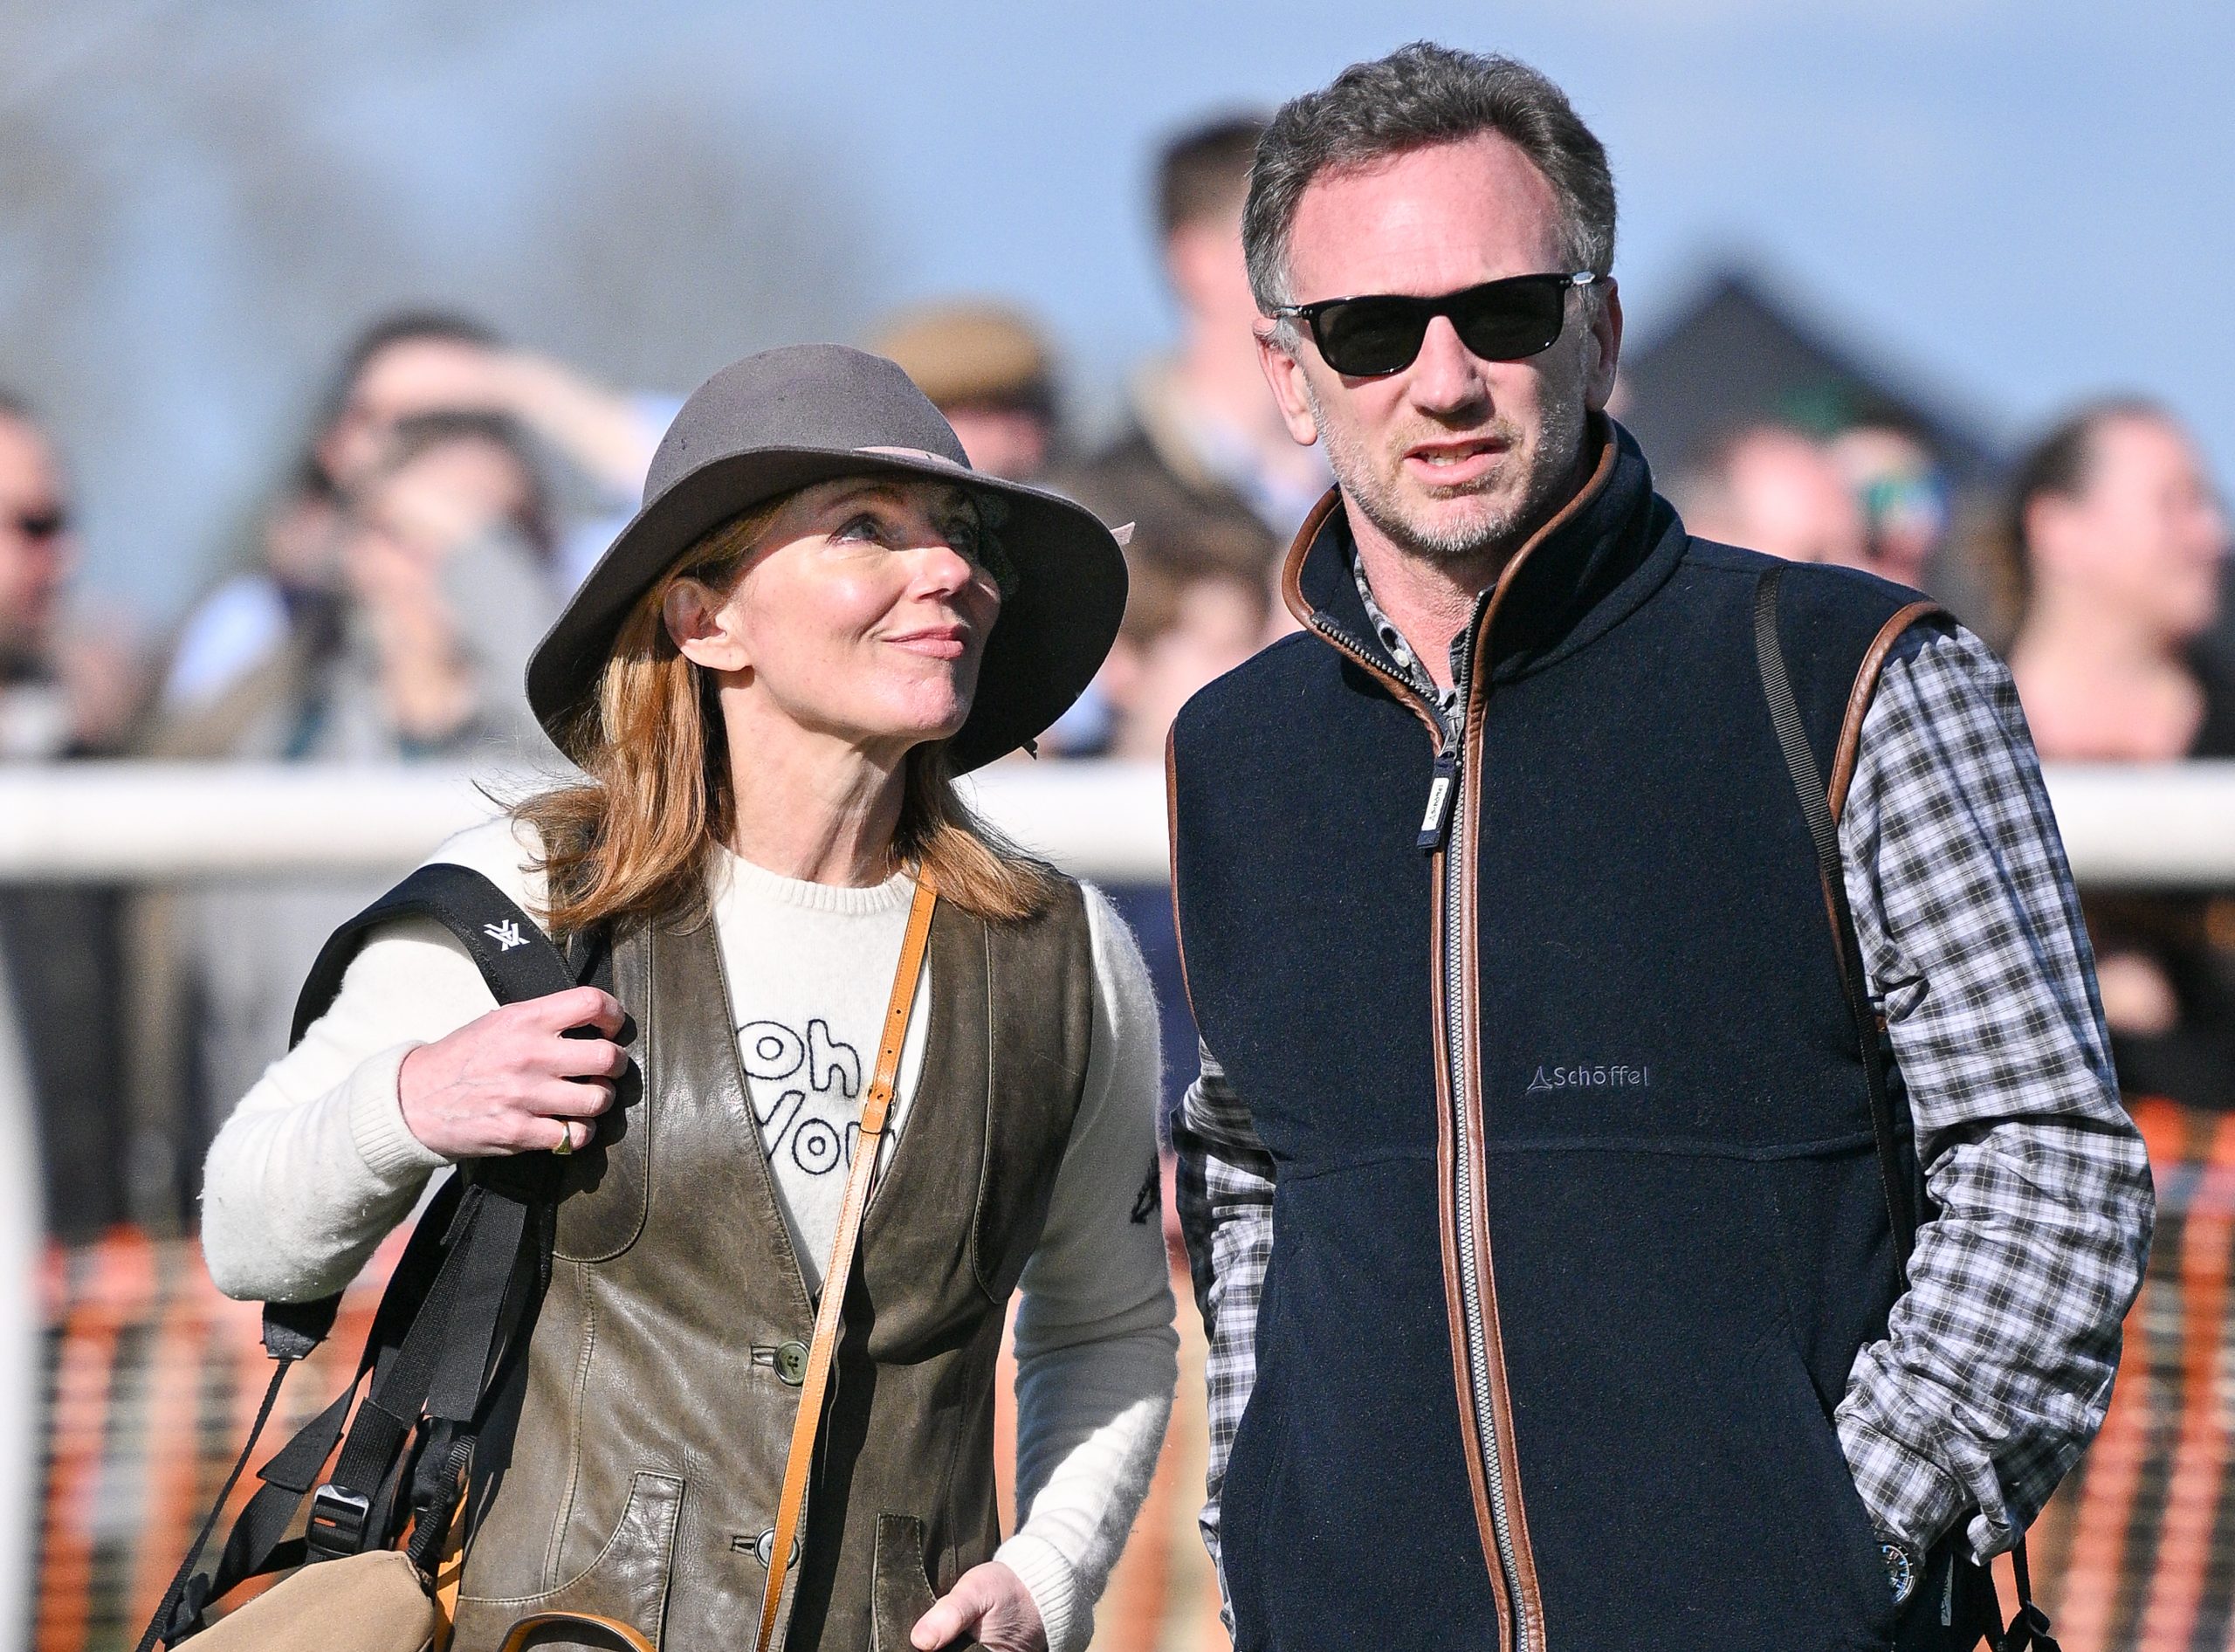 Horner brags bond with Geri Halliwell is ‘fantastic’ & Bernie calls their patch-up ‘peace in our time’ after sext stormHorner’s female accuser’s appeal against him being cleared is ongoing